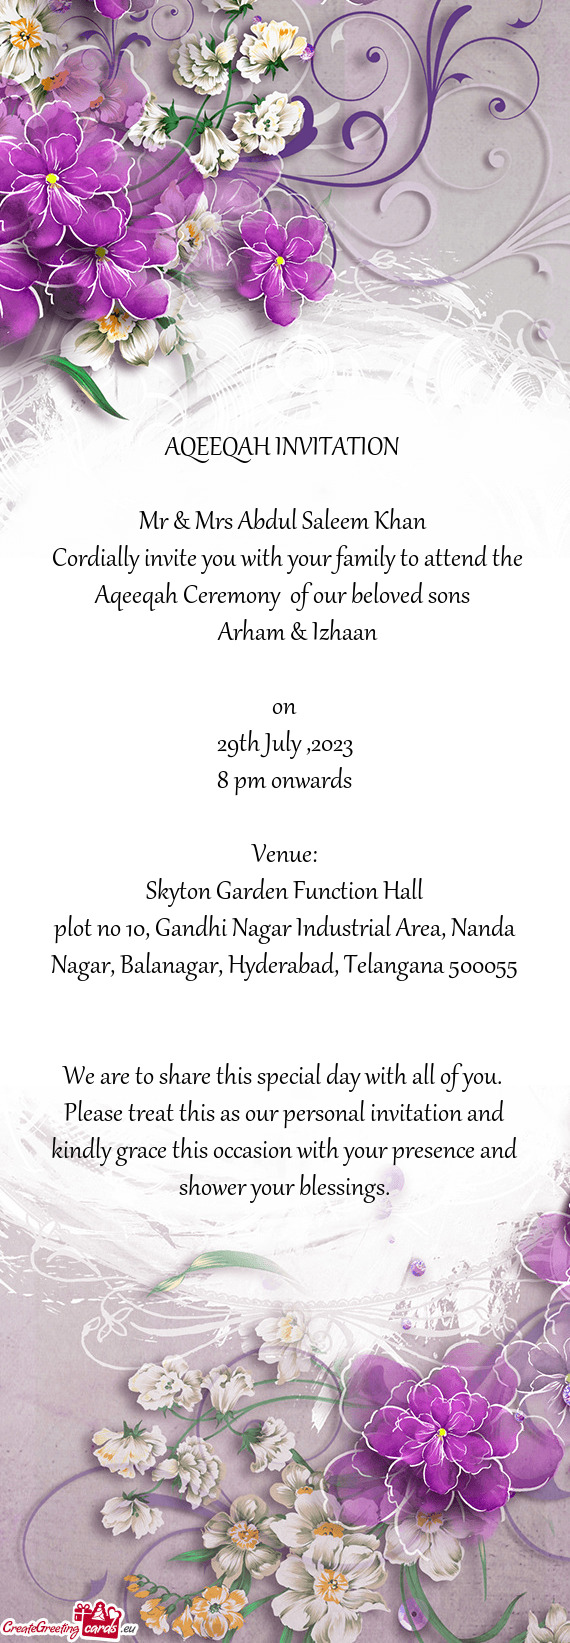 Cordially invite you with your family to attend the Aqeeqah Ceremony of our beloved sons